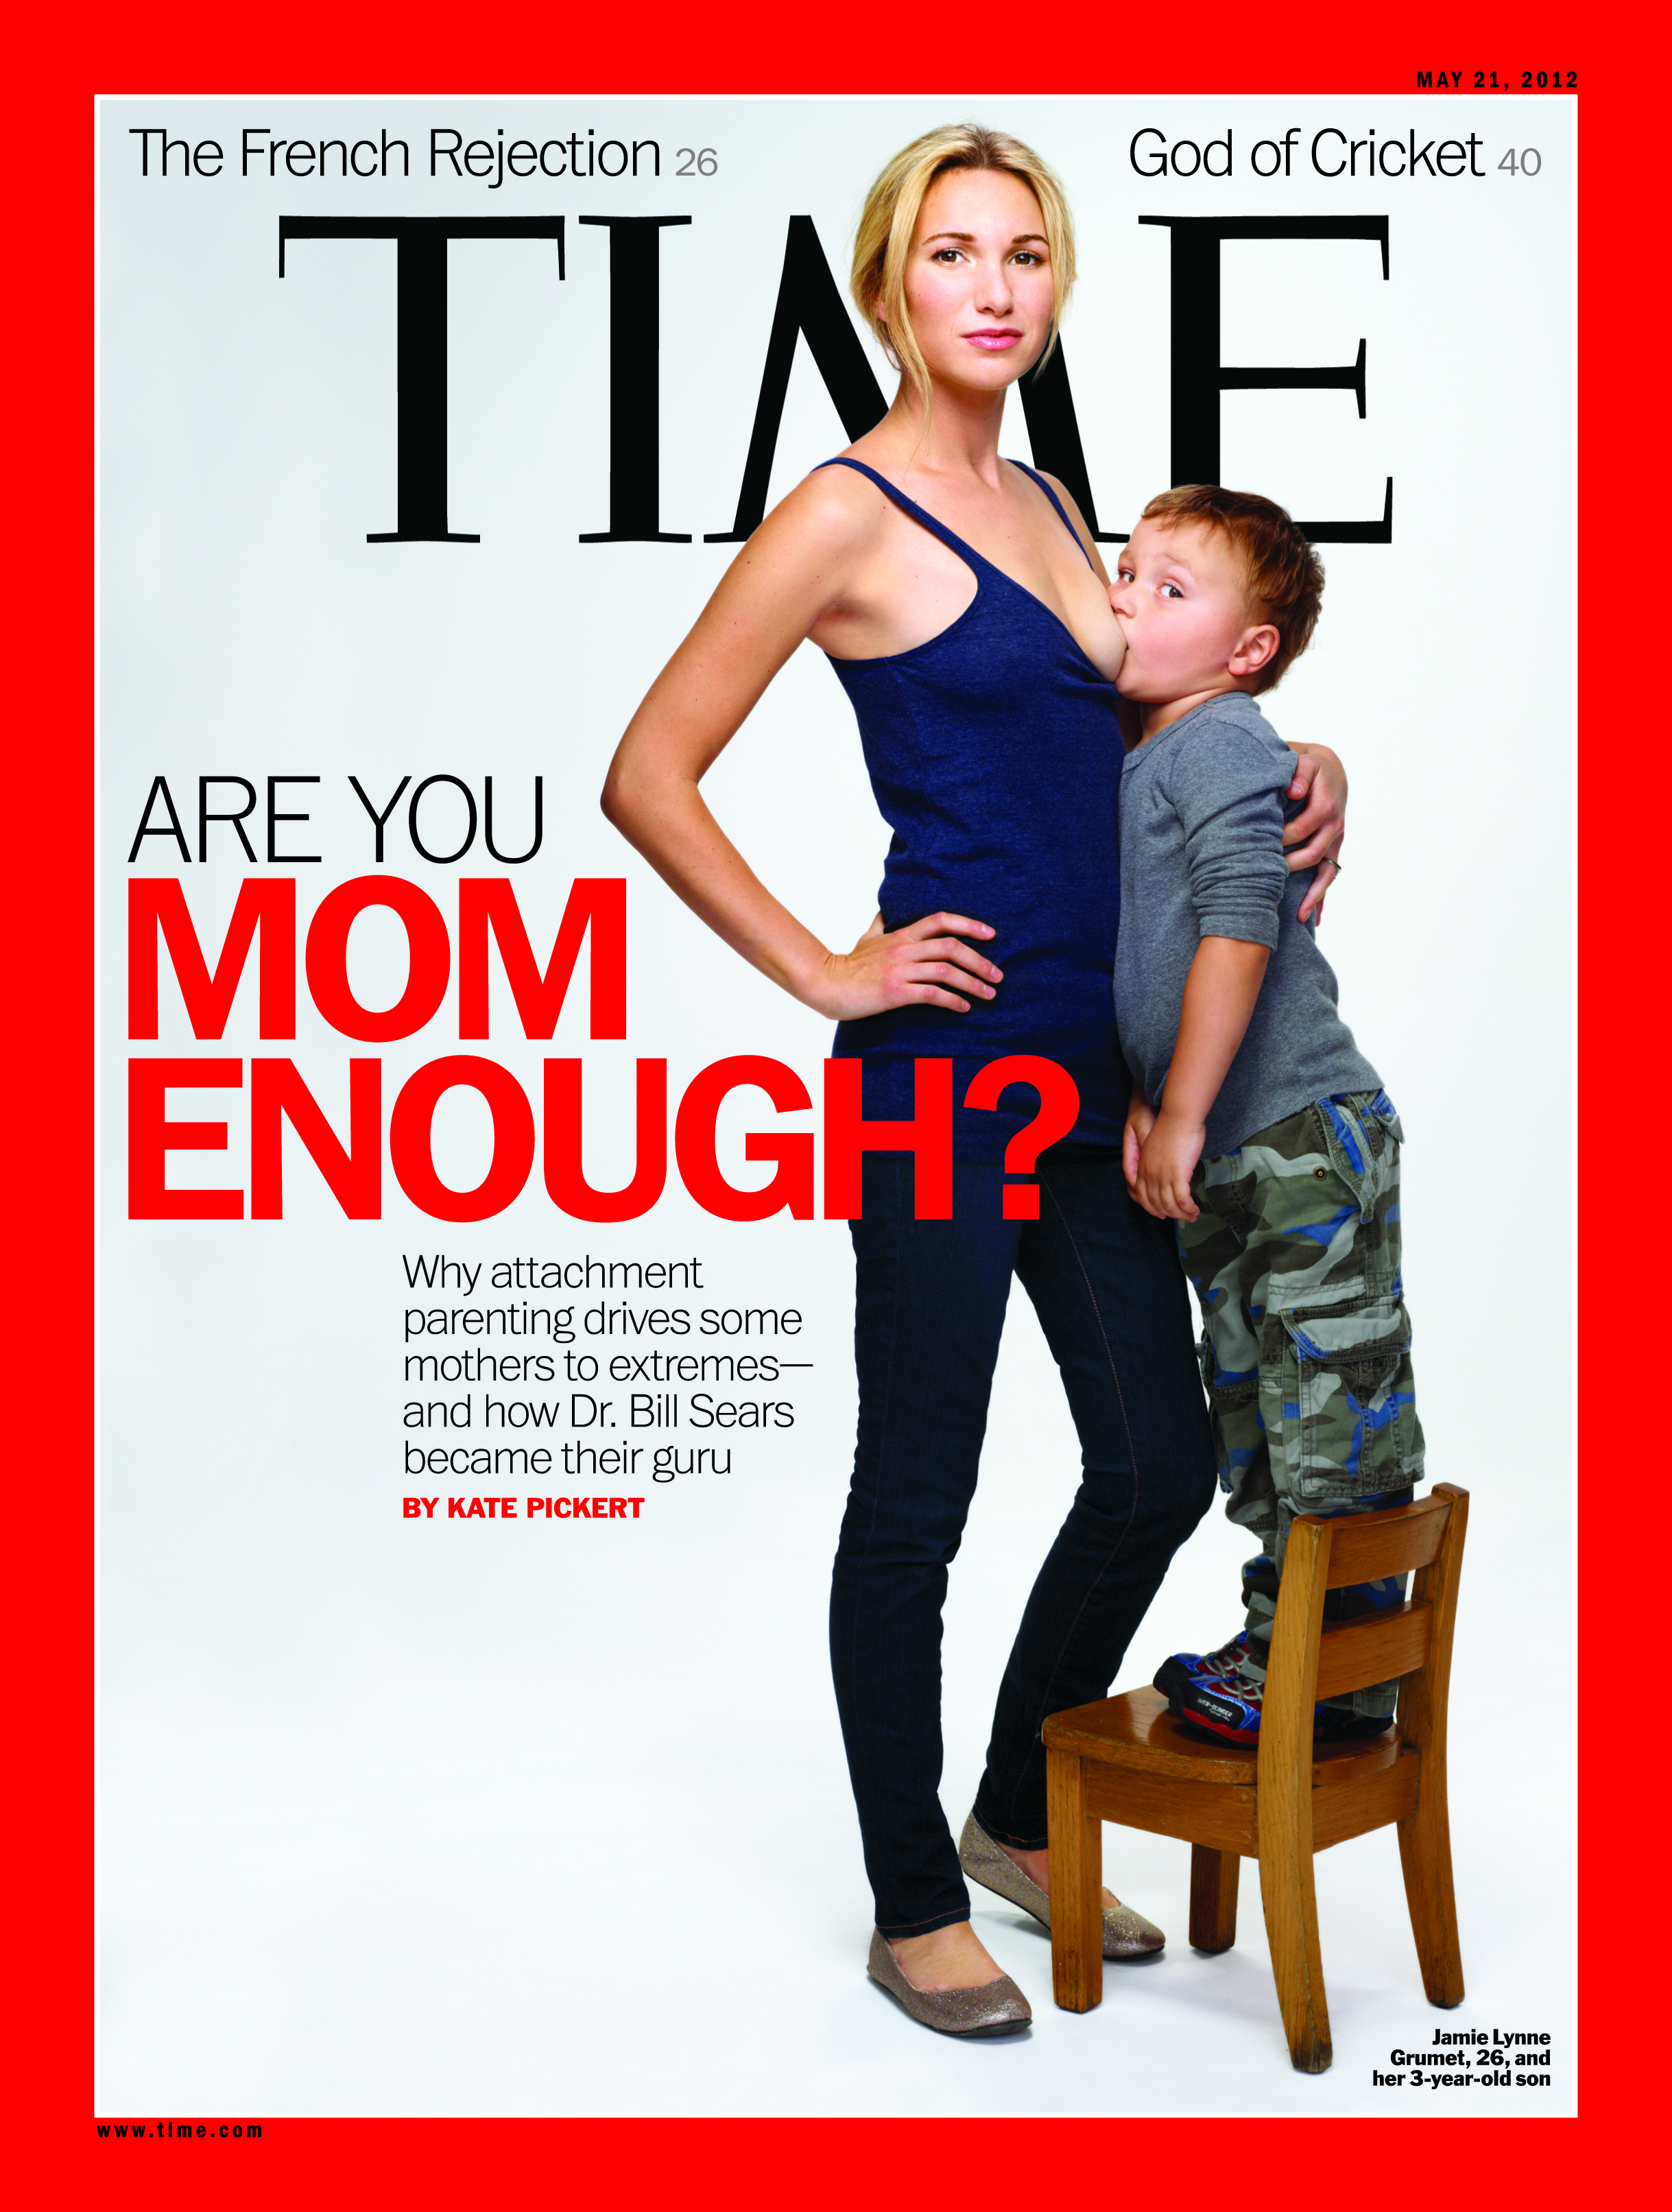 TIME-May 21, 2012: "Are You Mom Enough?"